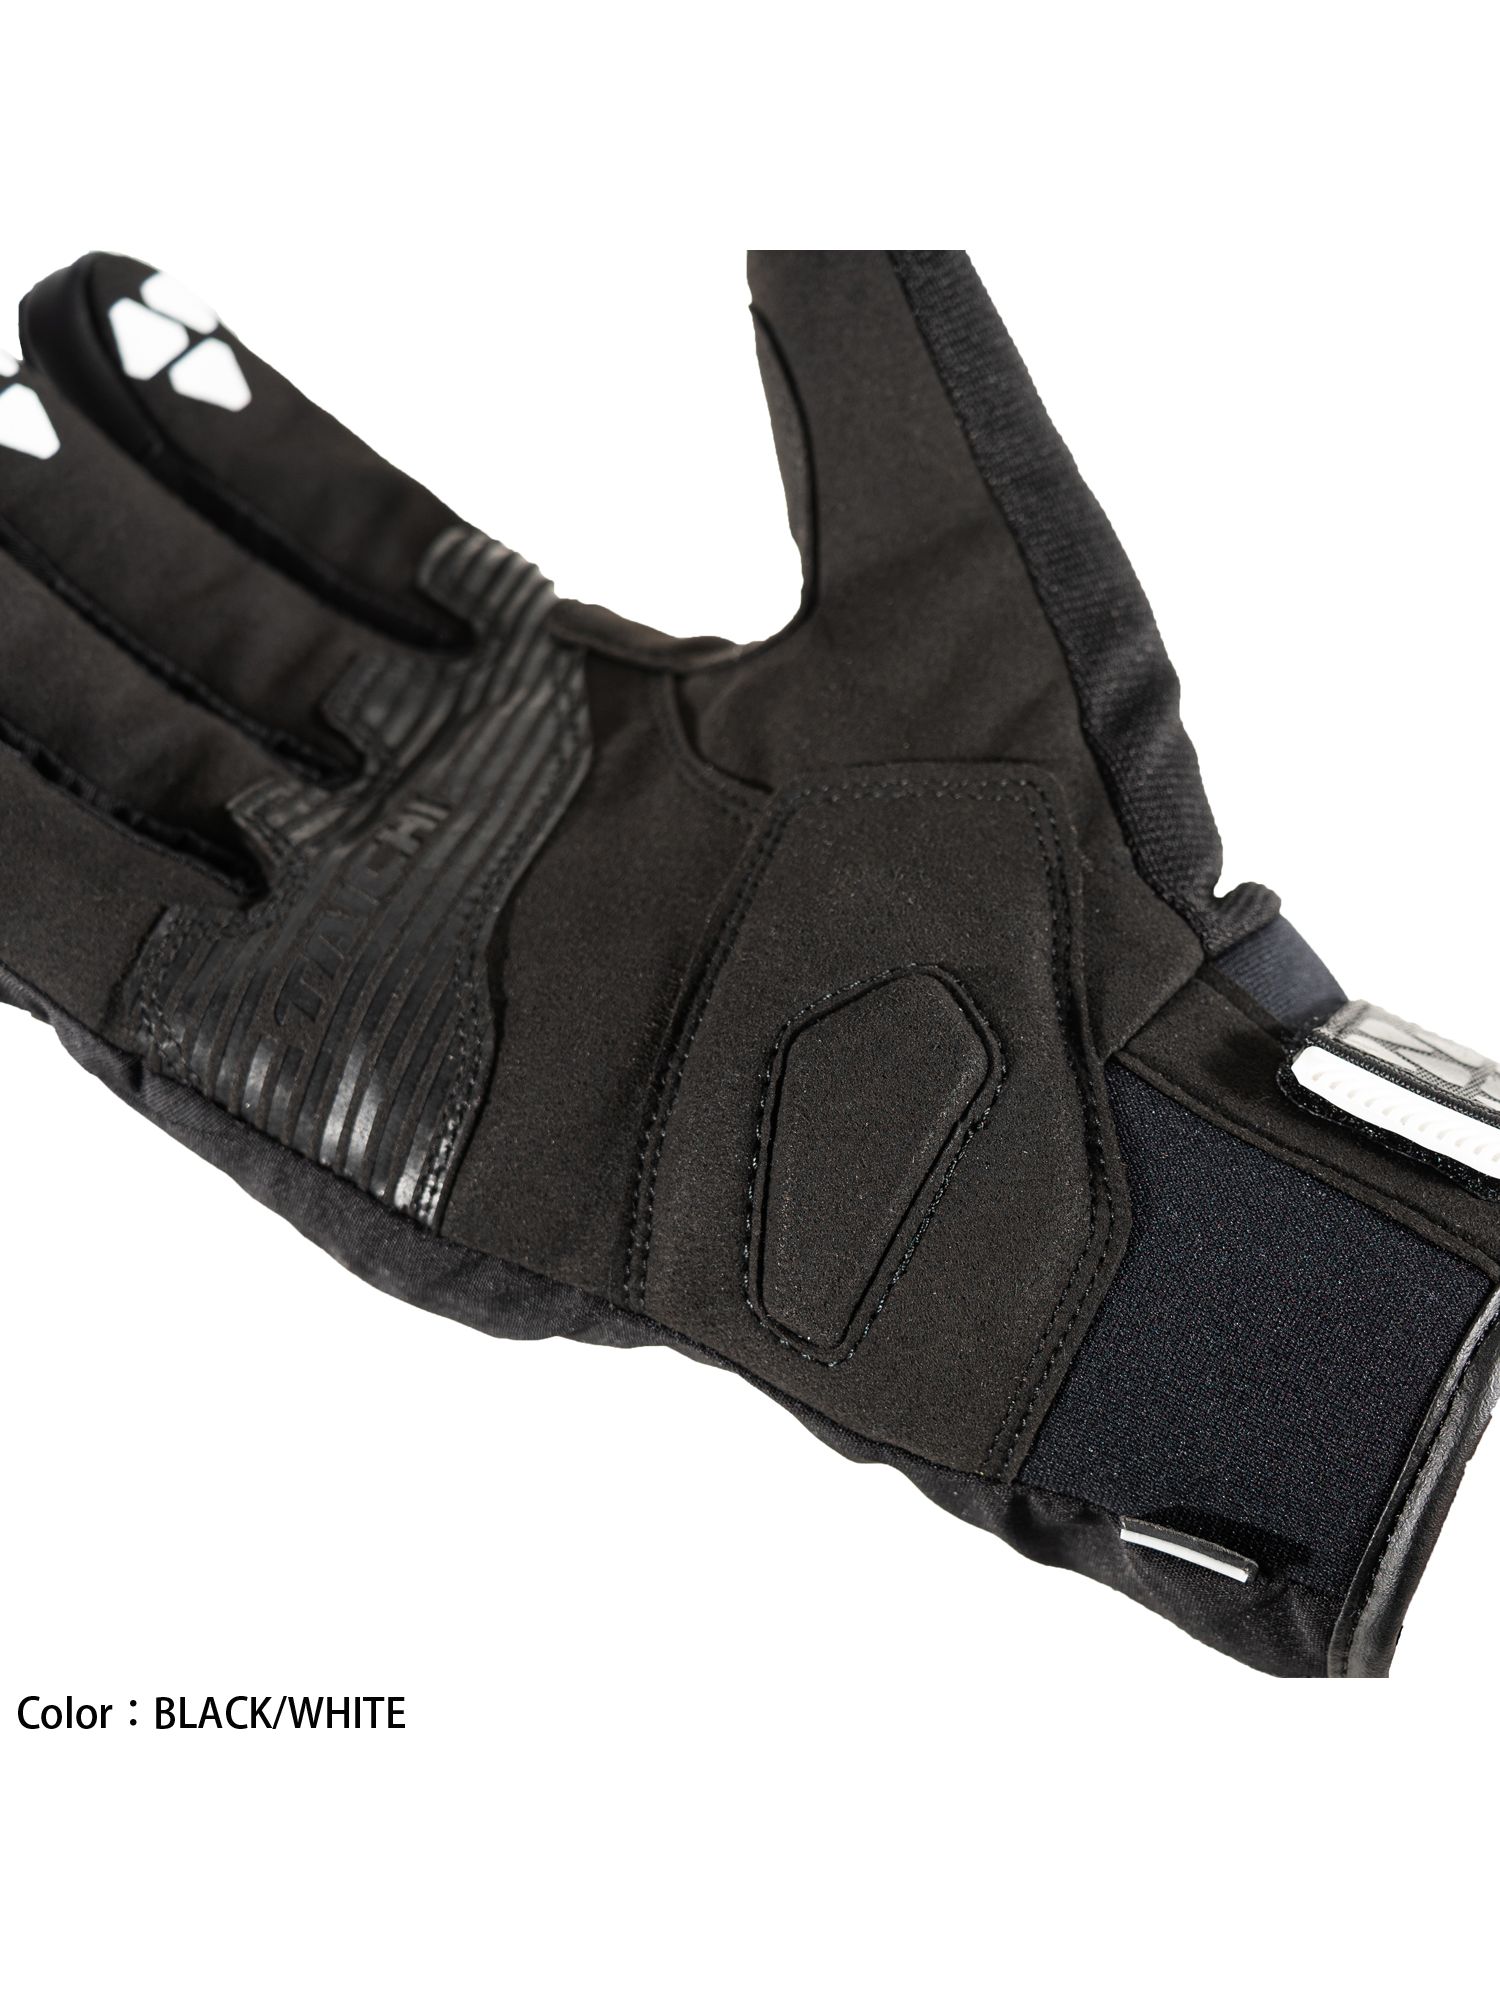 RST644｜STEALTH WINTER GLOVES［5colors］